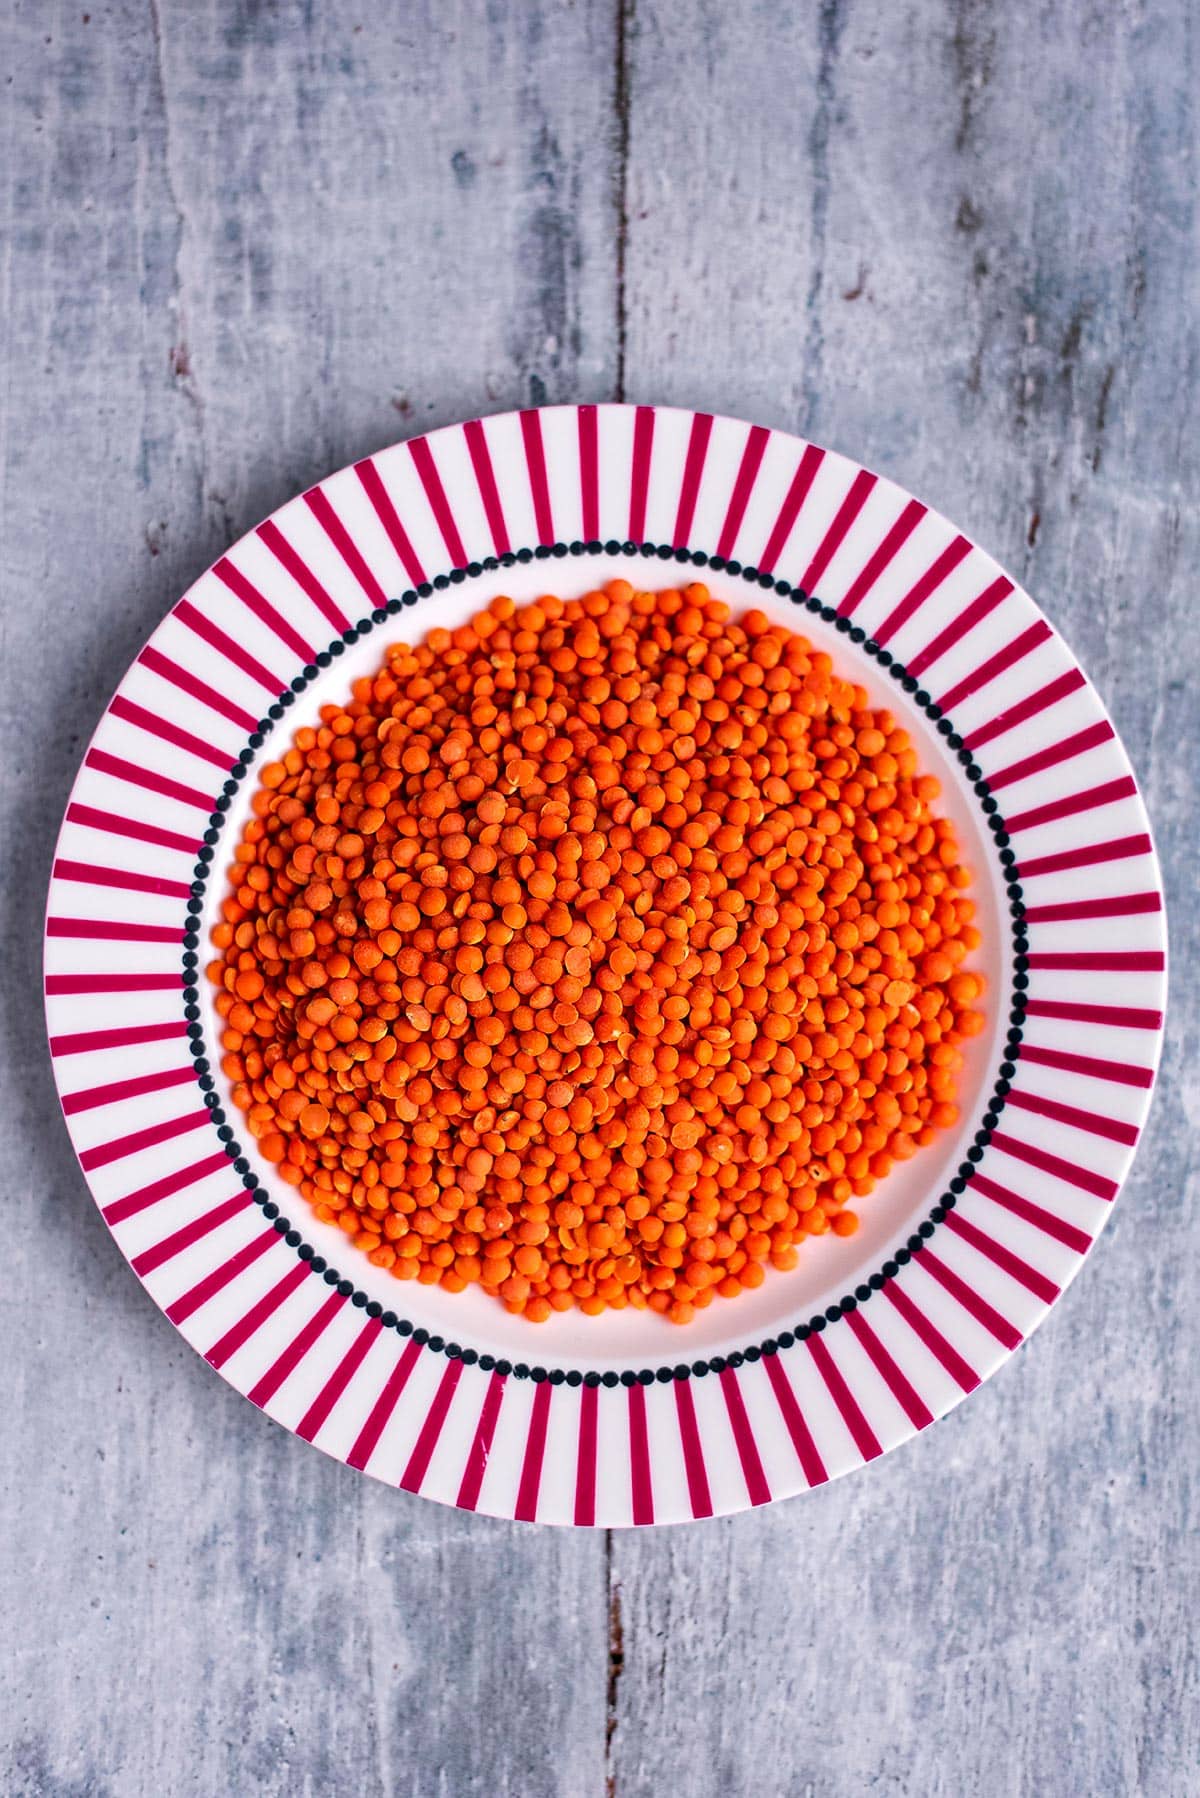 A large pile of red lentils on a plate.